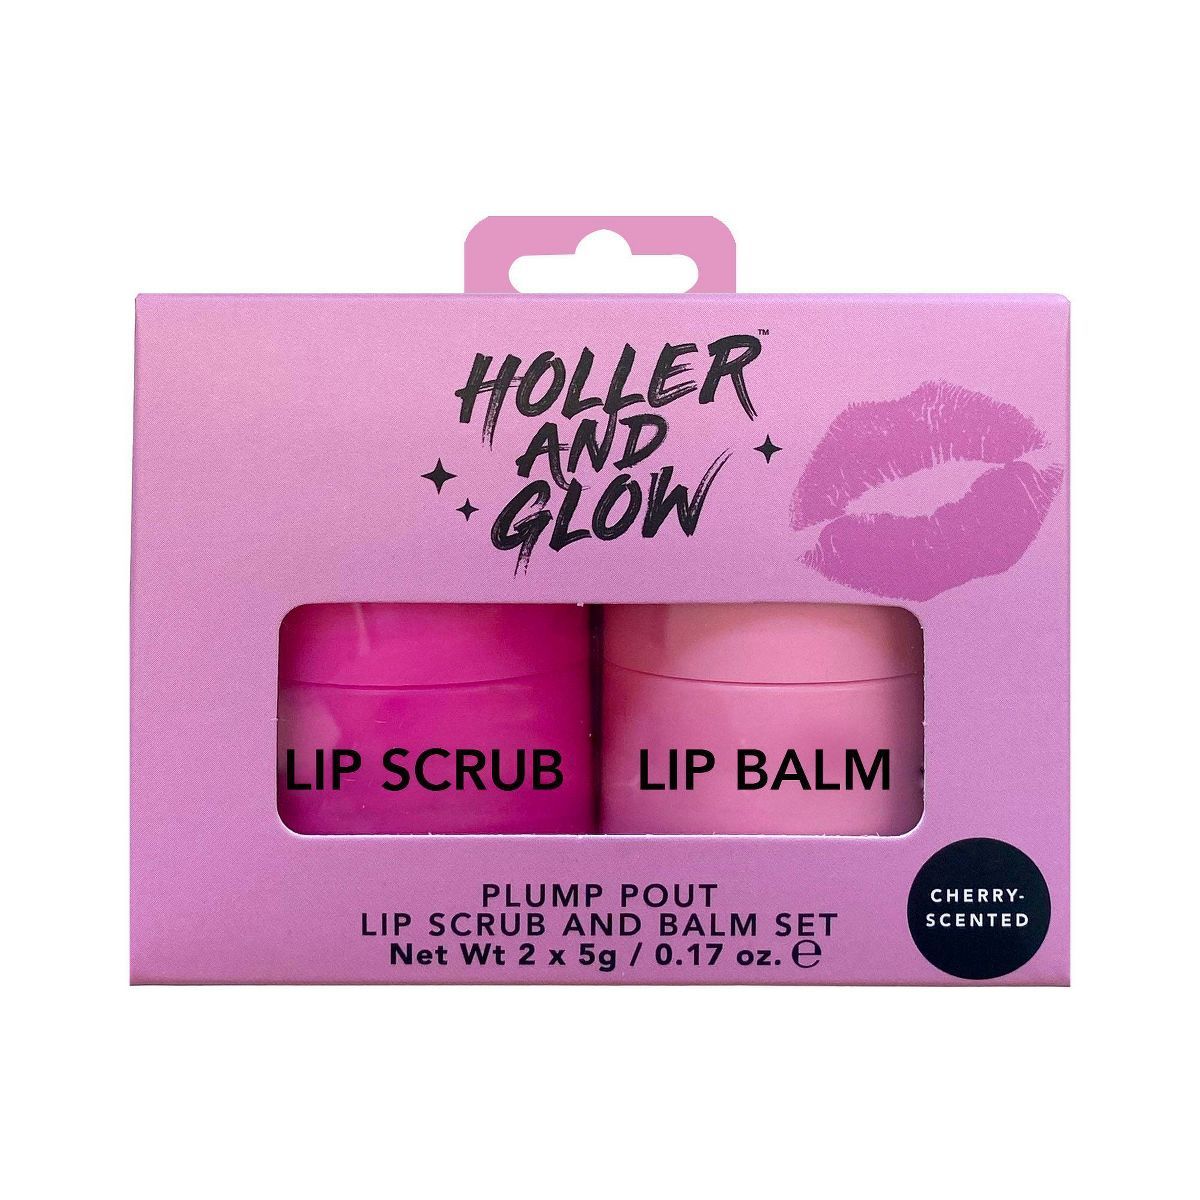 Holler and Glow Plump Pout Lip Scrub and Balm Set - Cherry - 0.17oz/2ct | Target